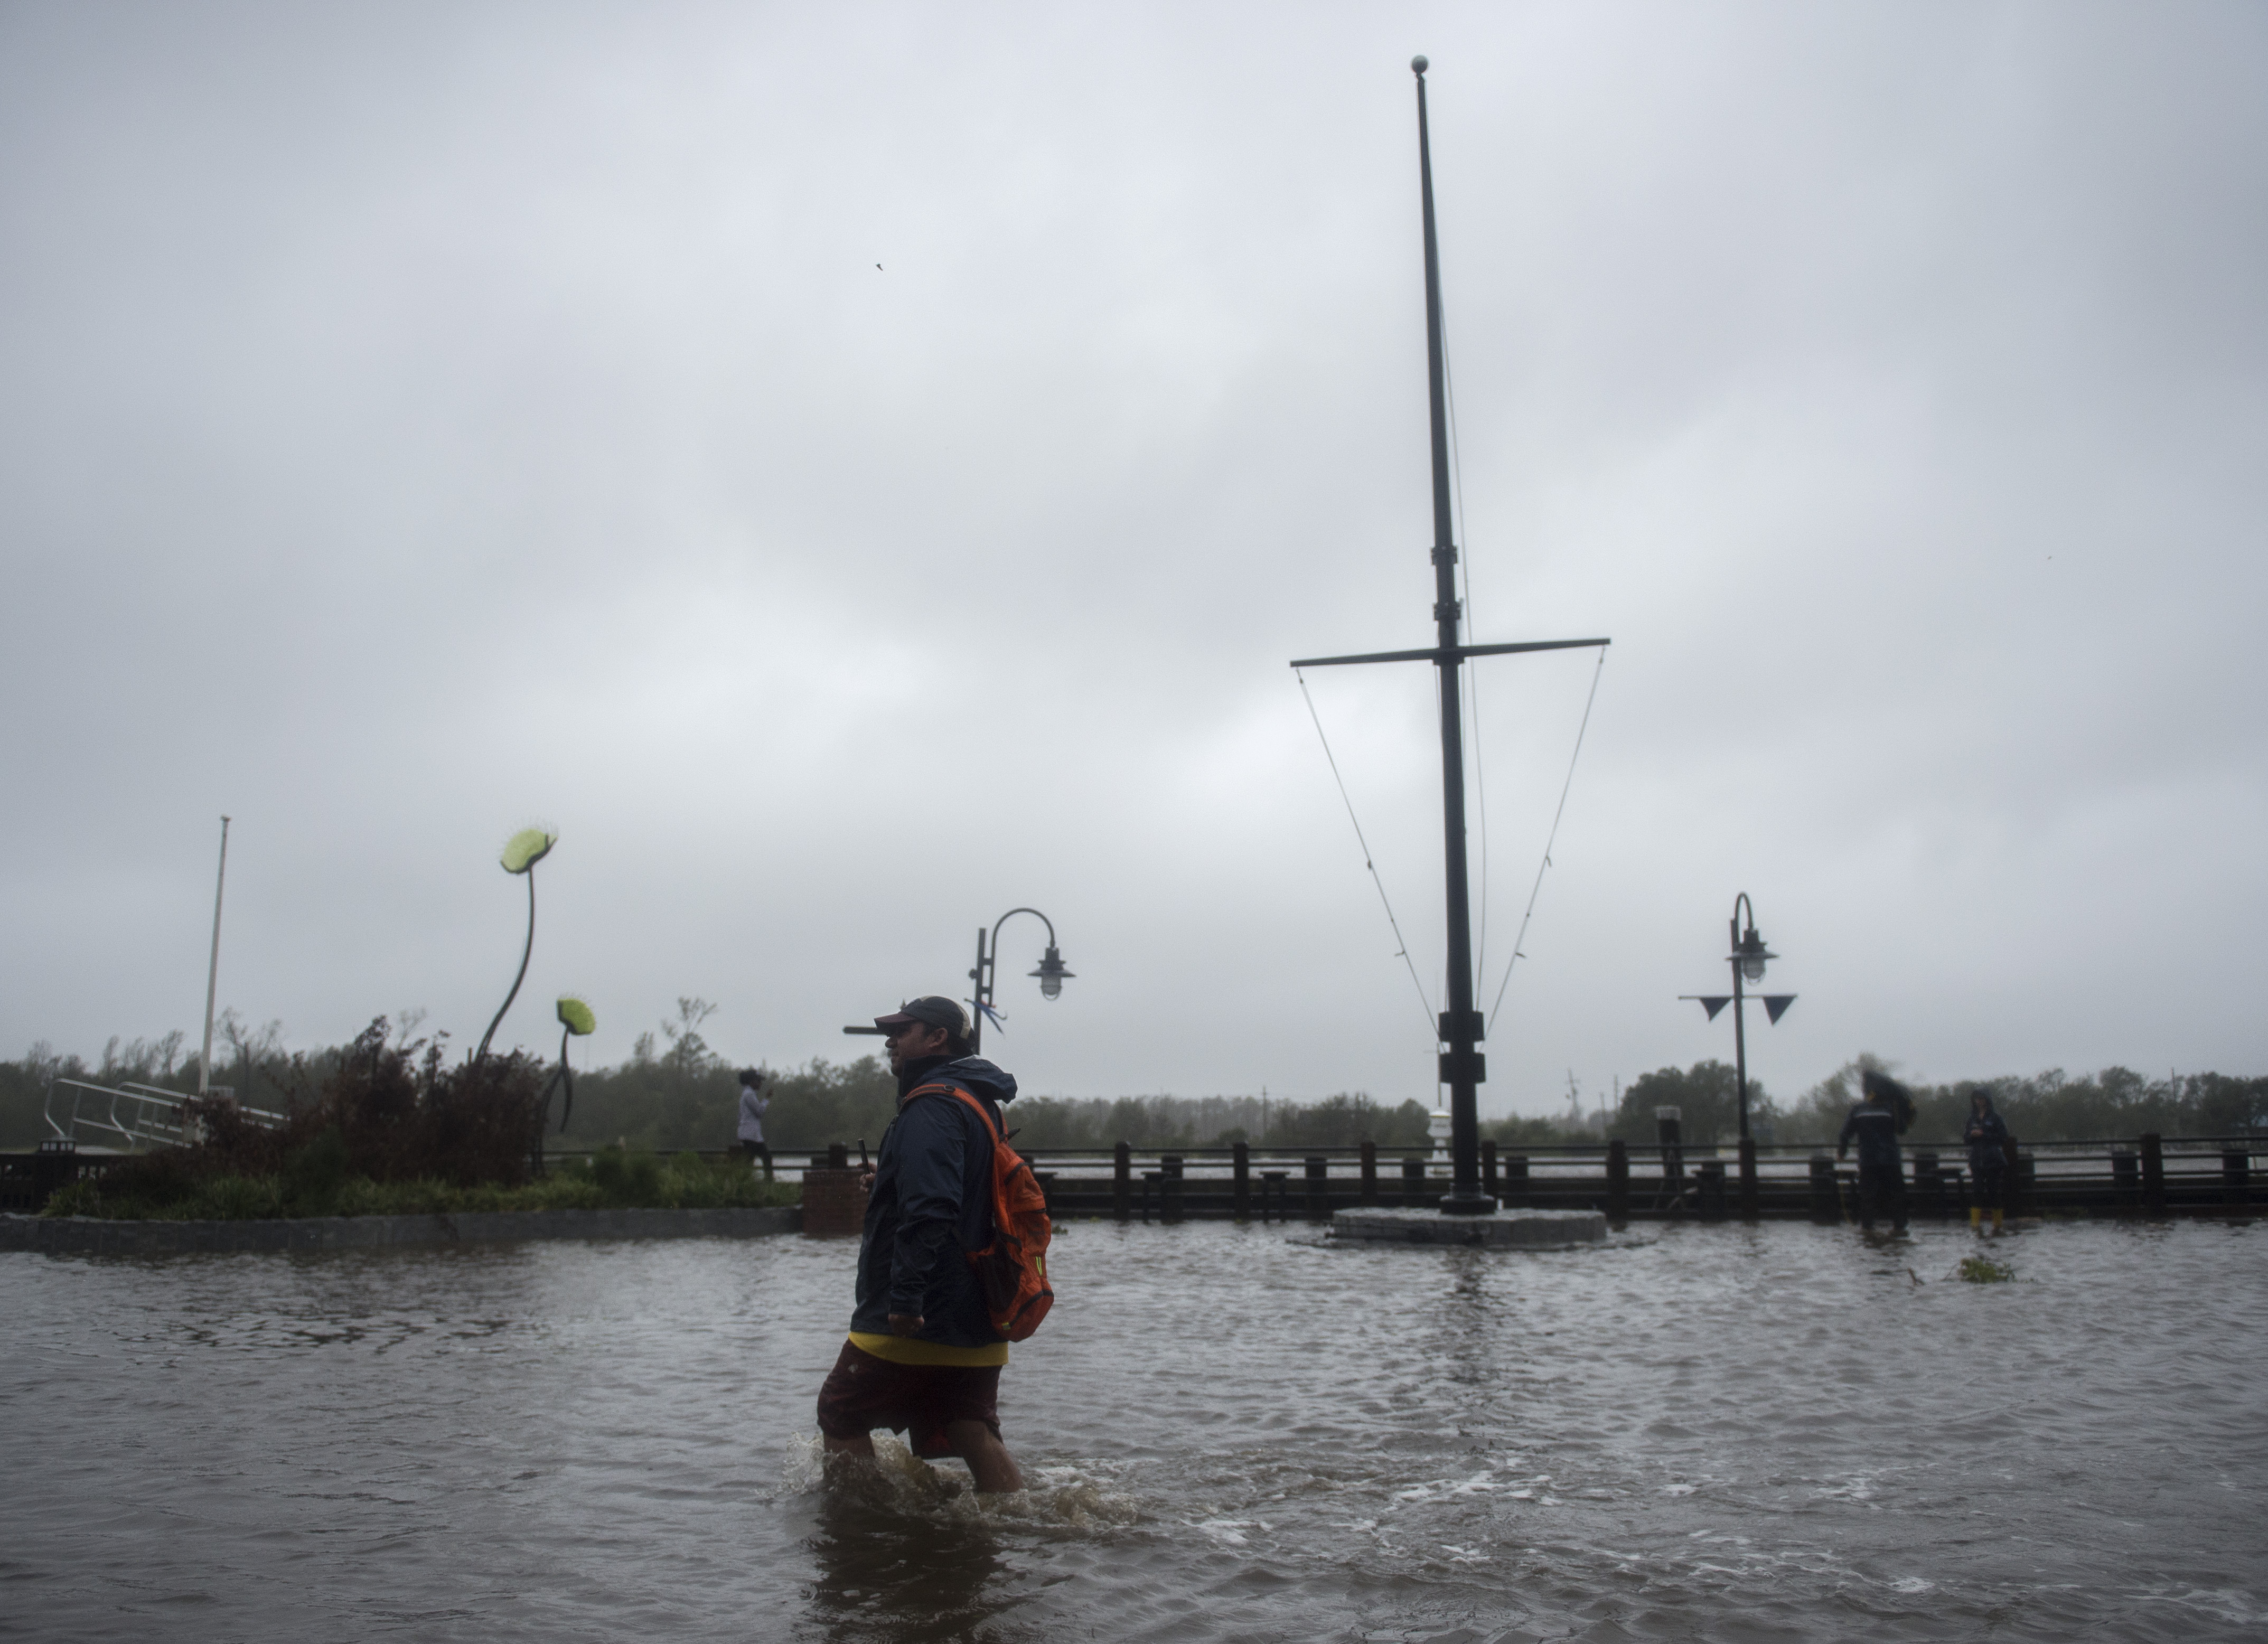 A man wades through rising flood waters on the Cape Fear River in Wilmington, North Carolina, on Friday.